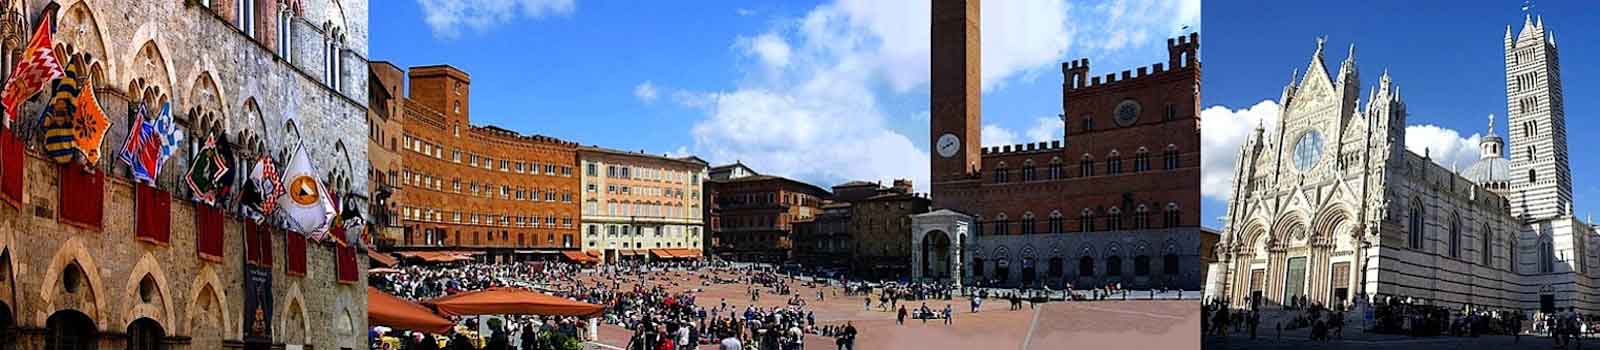 Collage of photo of 3 sites in Siena